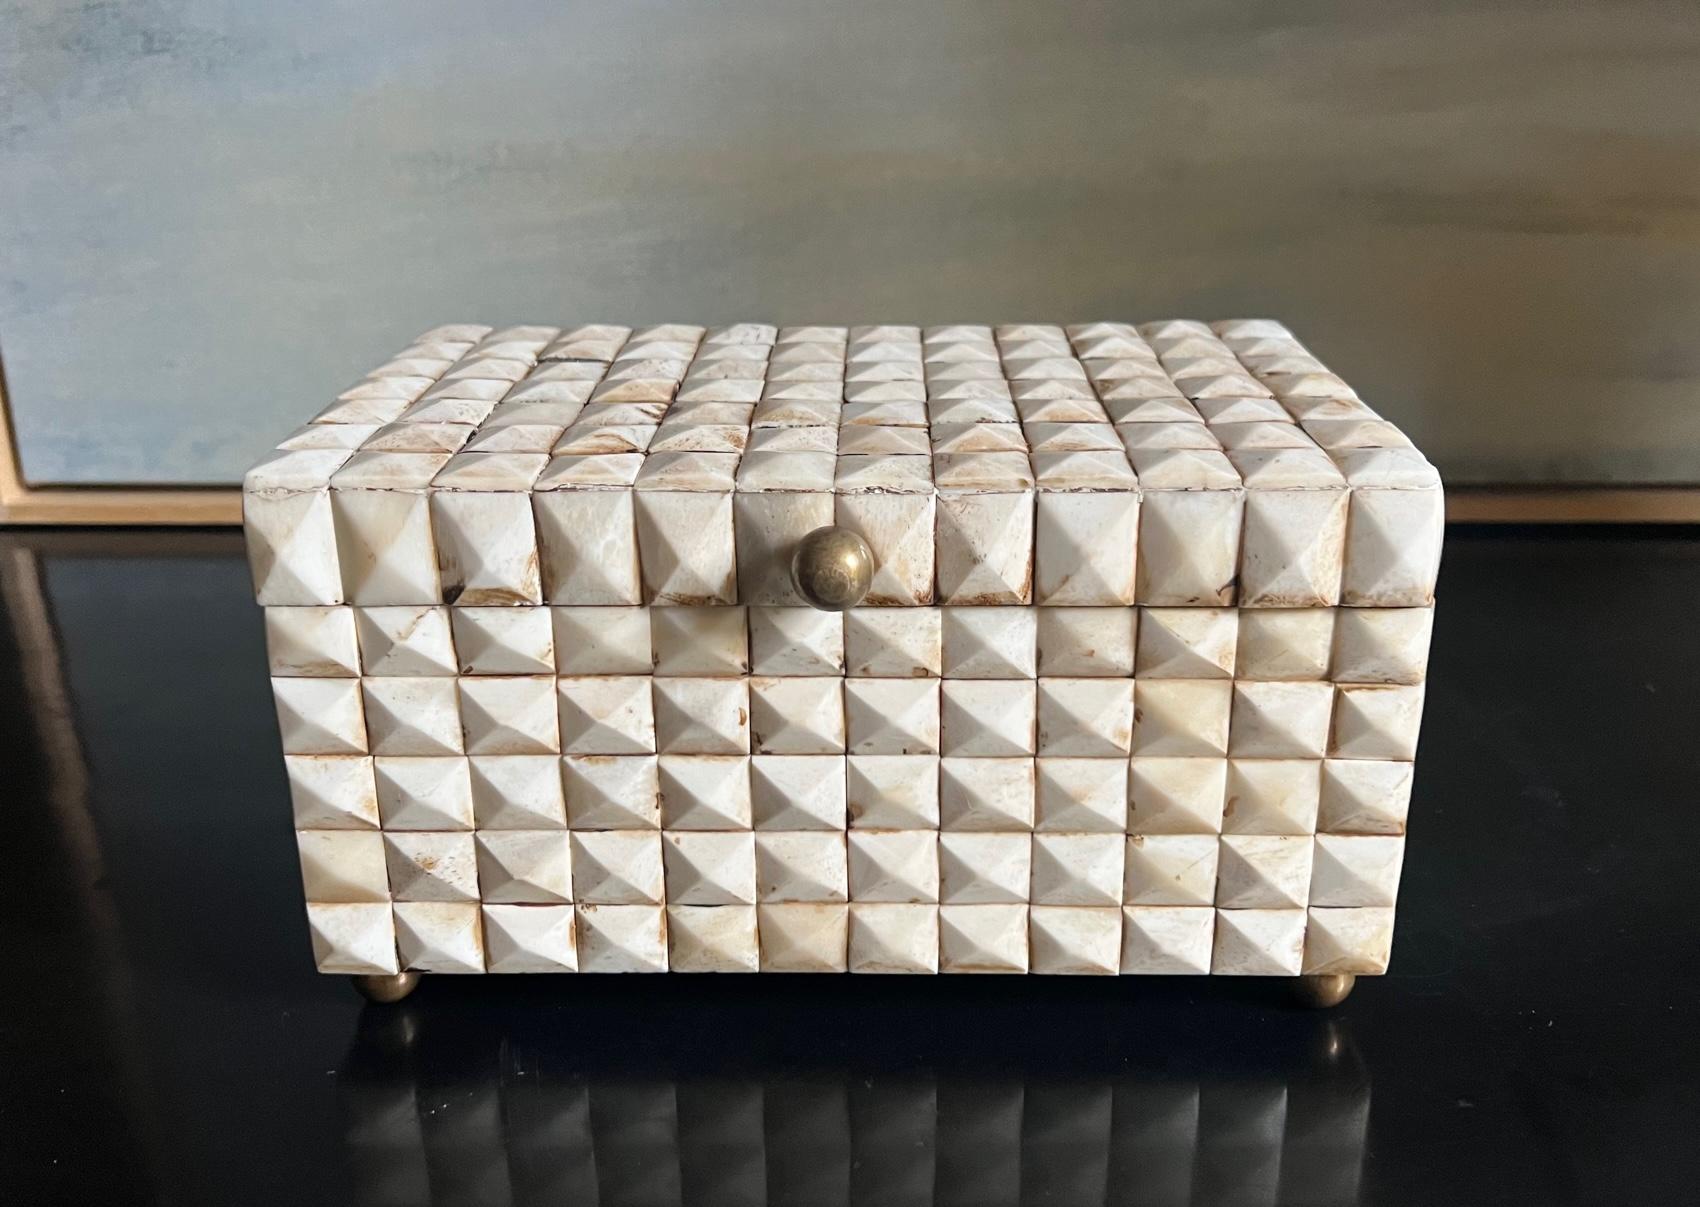 Rustic Wooden Rectangle Box Covered in Bone Facets with Brass Knobs & Feet